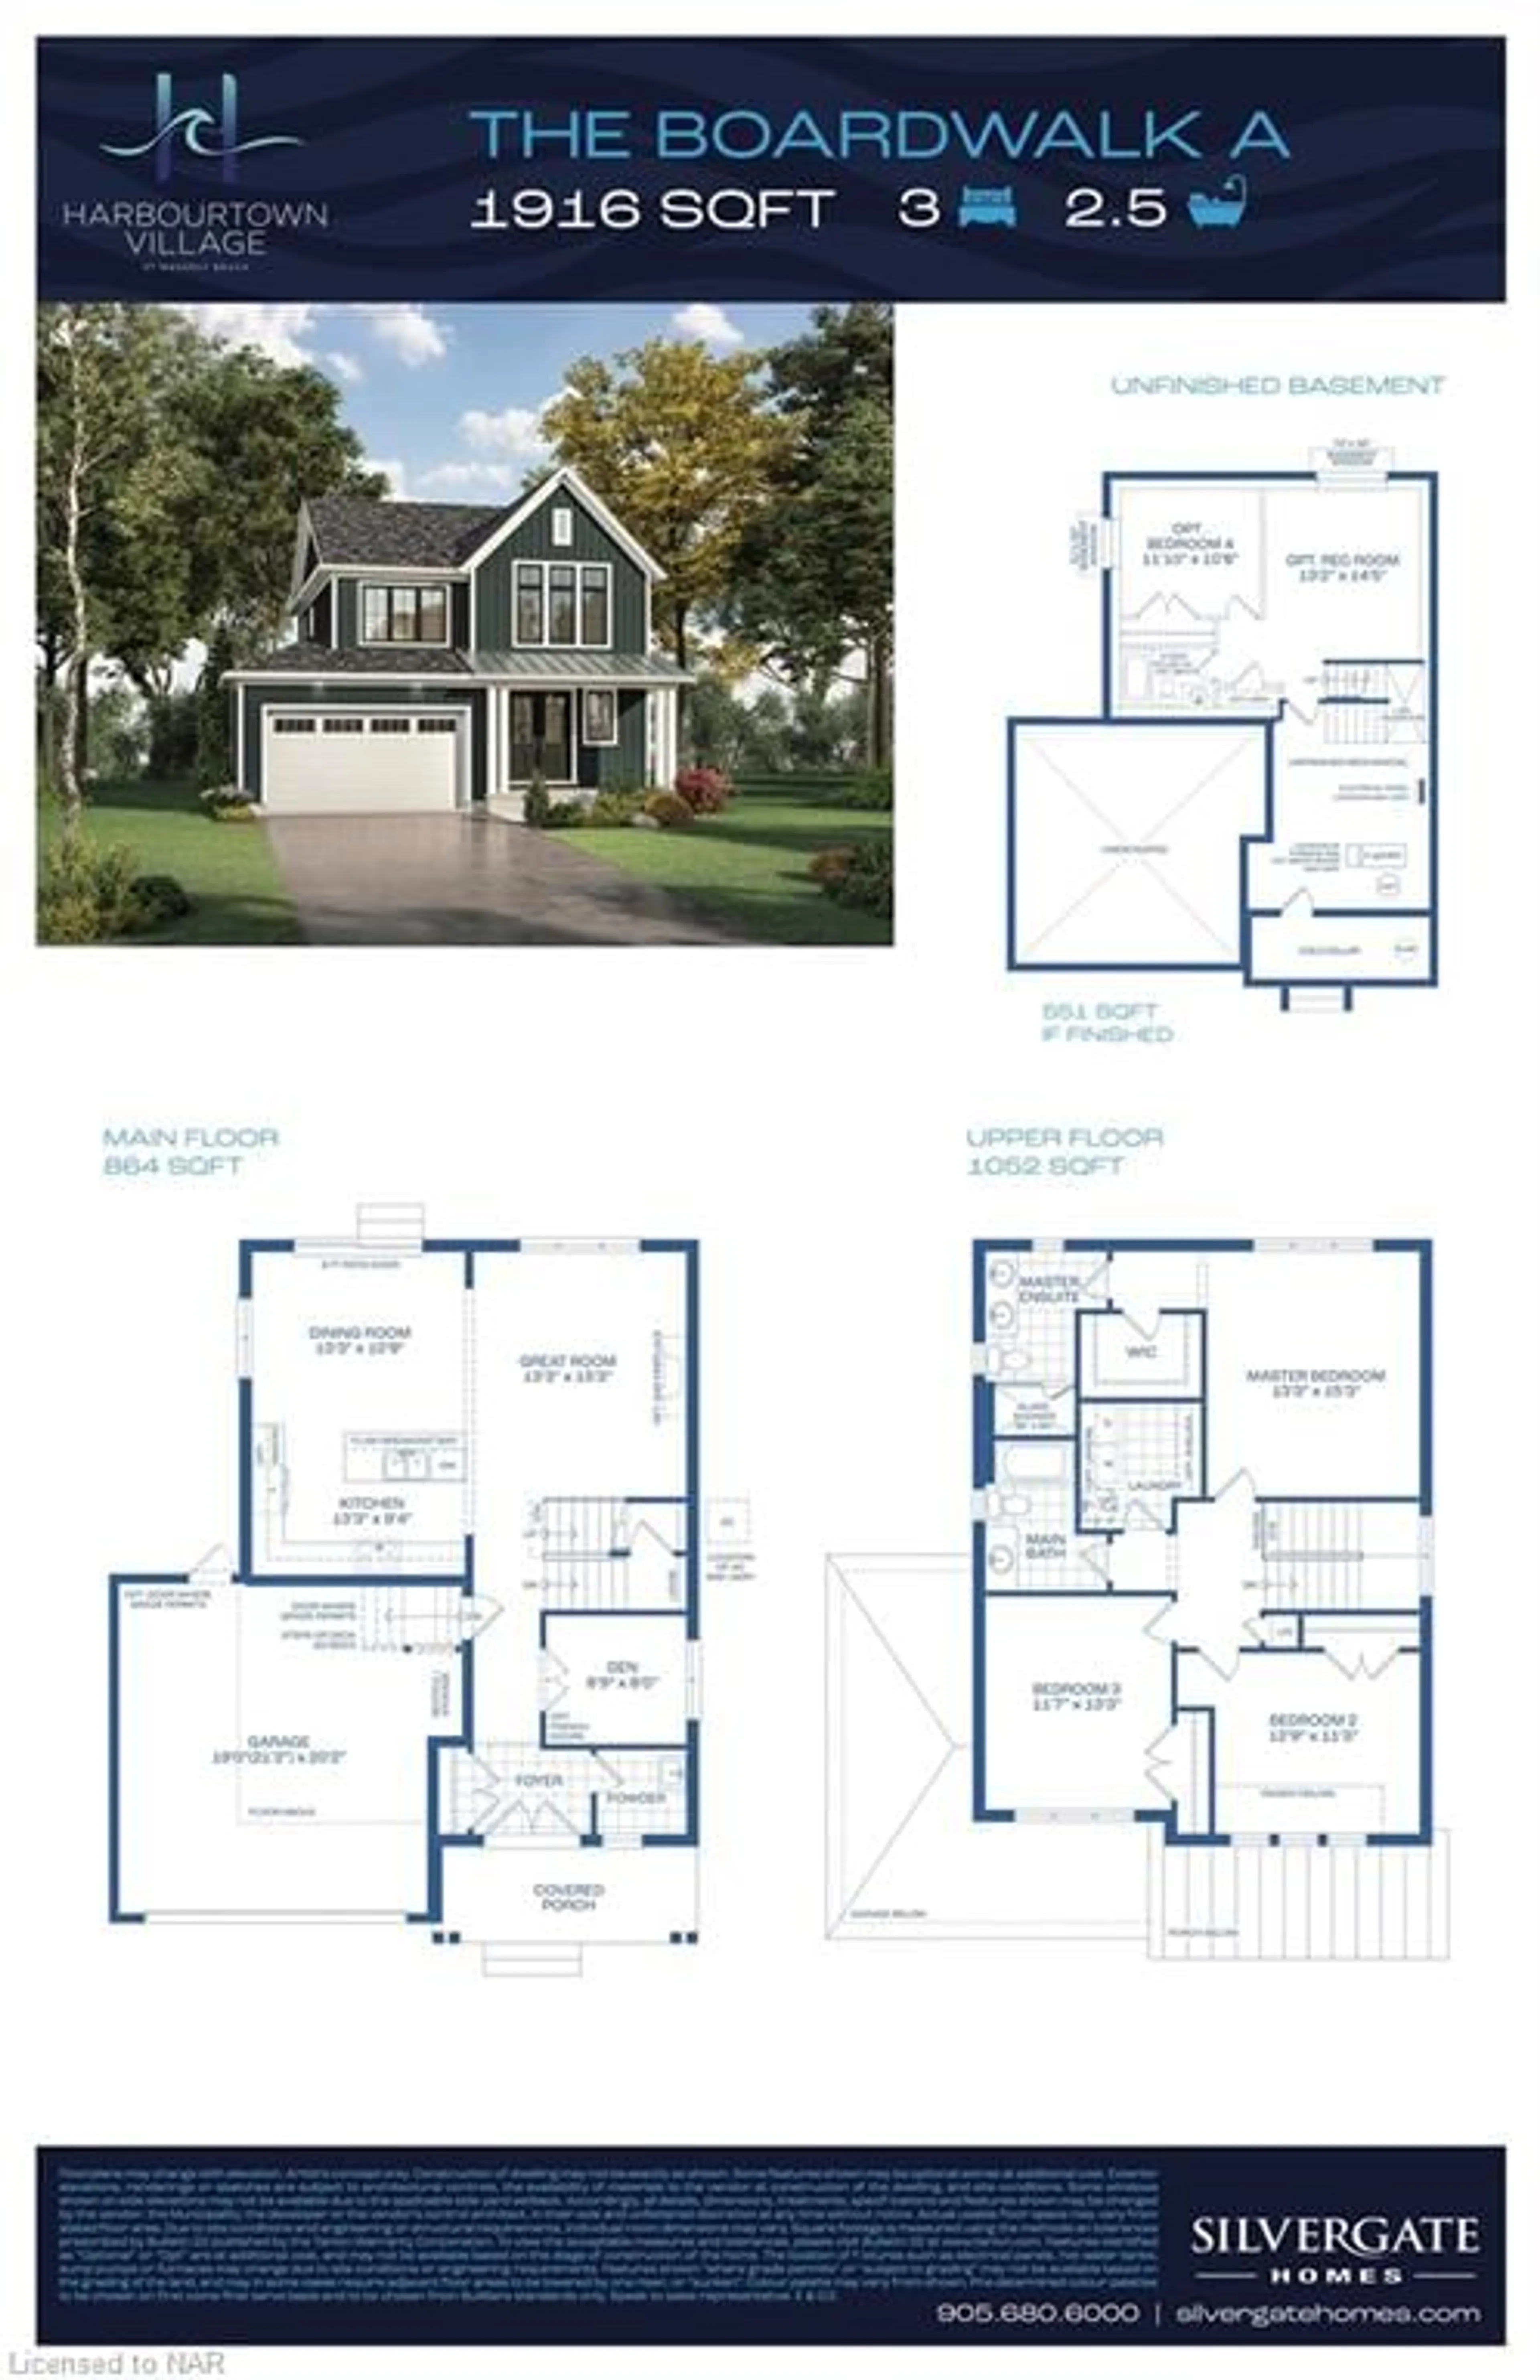 Floor plan for 584 Mississauga Ave, Fort Erie Ontario L2A 4K5